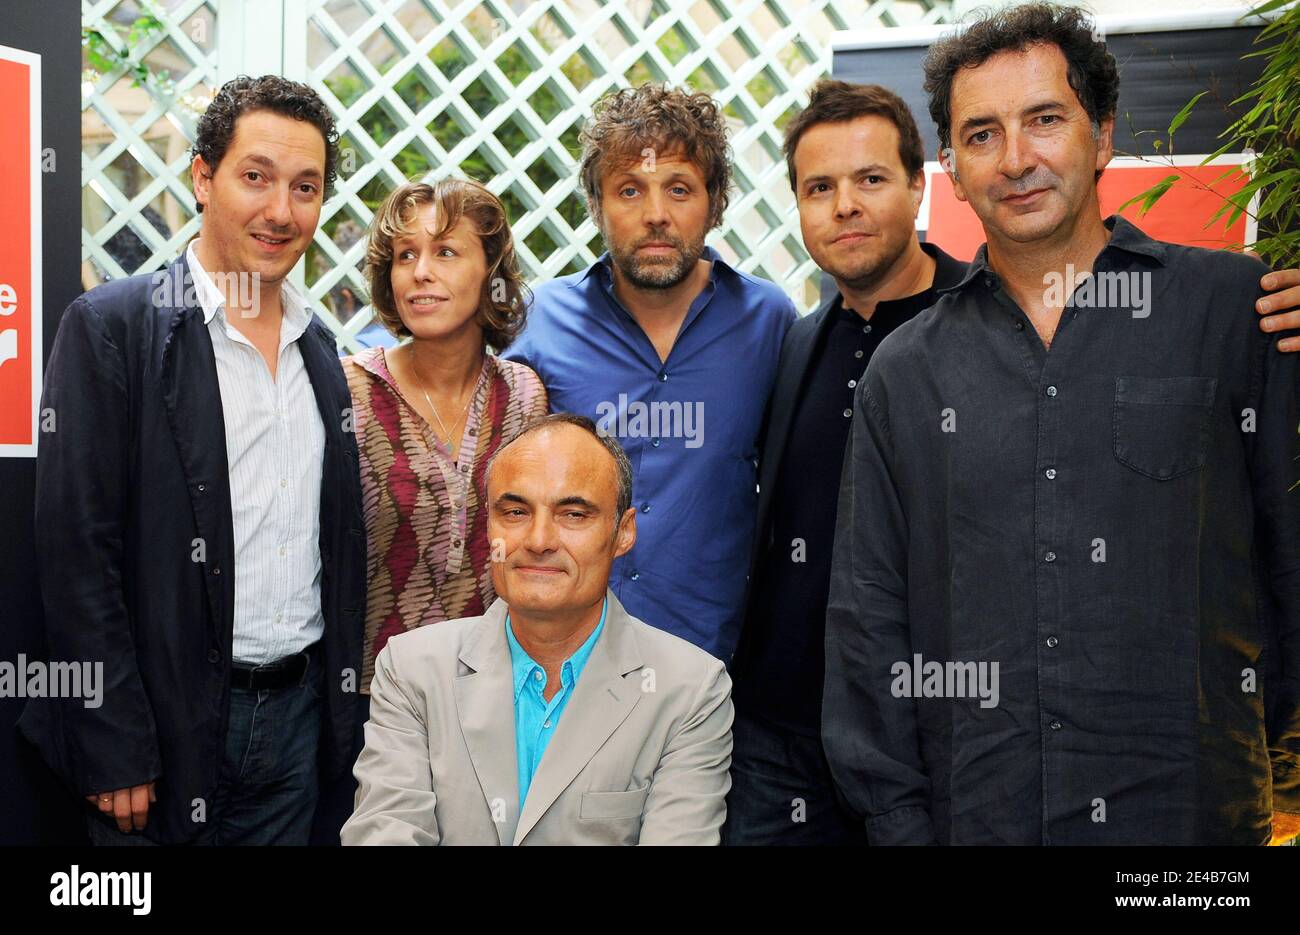 Stephane Guillon, Nicolas Demorand, Francois Morel, Pascale Clark,  Guillaume Gallienne with Philippe Val at the annual press conference of France  Inter radio in Paris, France on August 28, 2009. Photo by Thierry